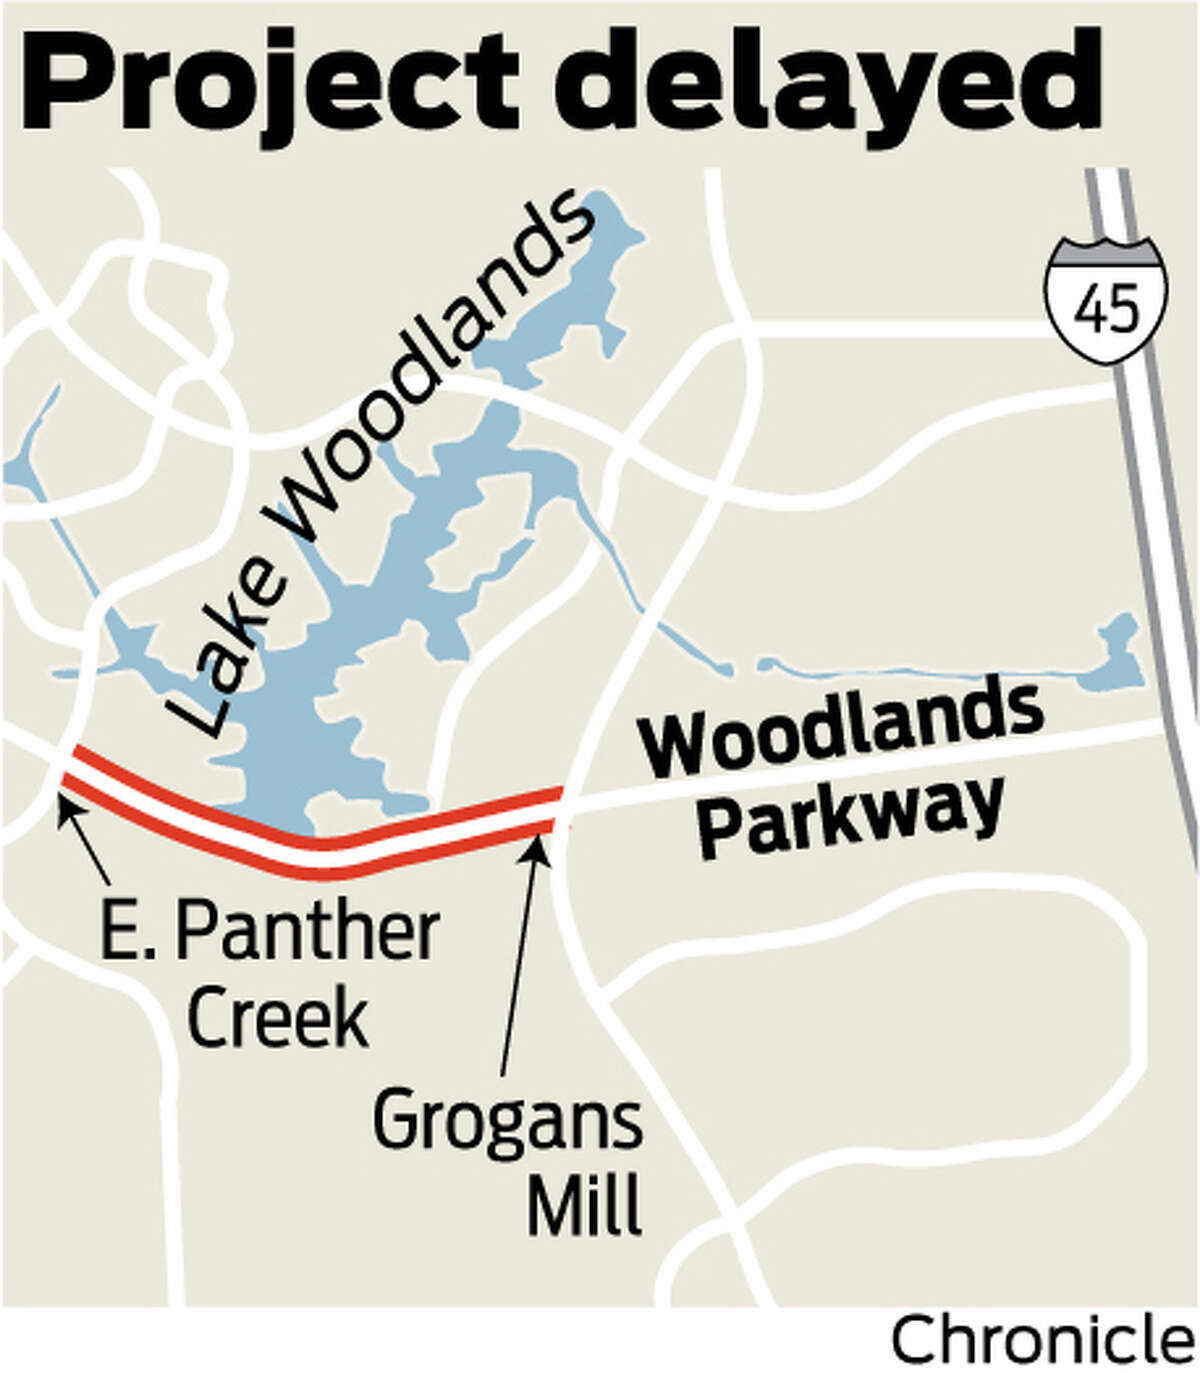 The state is widening the 1.3-mile section of the parkway from Grogans Mill Road to E. Panther Creek Drive, but the project is several months behind schedule and the state has been imposing late fees on the contractor.